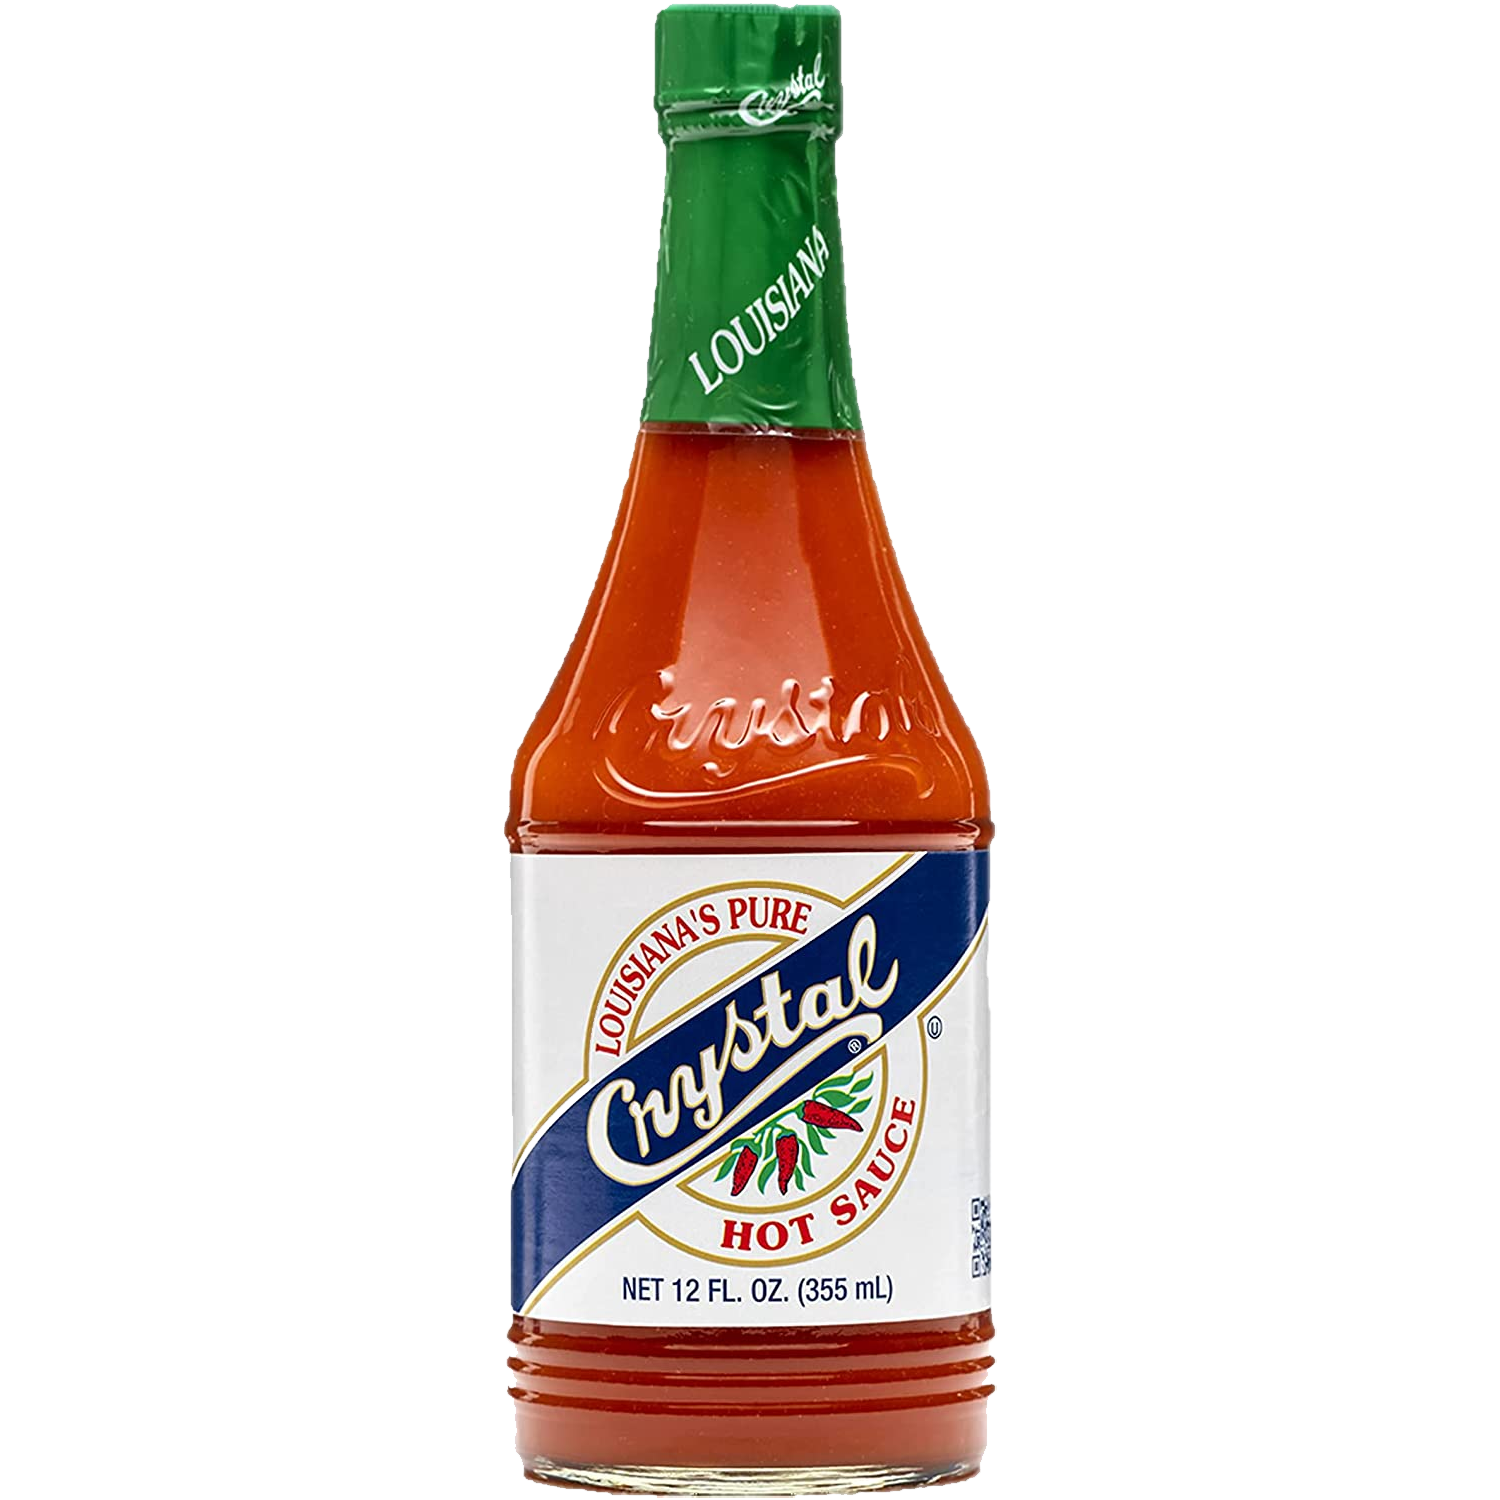 Crystal Louisiana Pure Hot Sauce 354ml sold by American grocer Uk